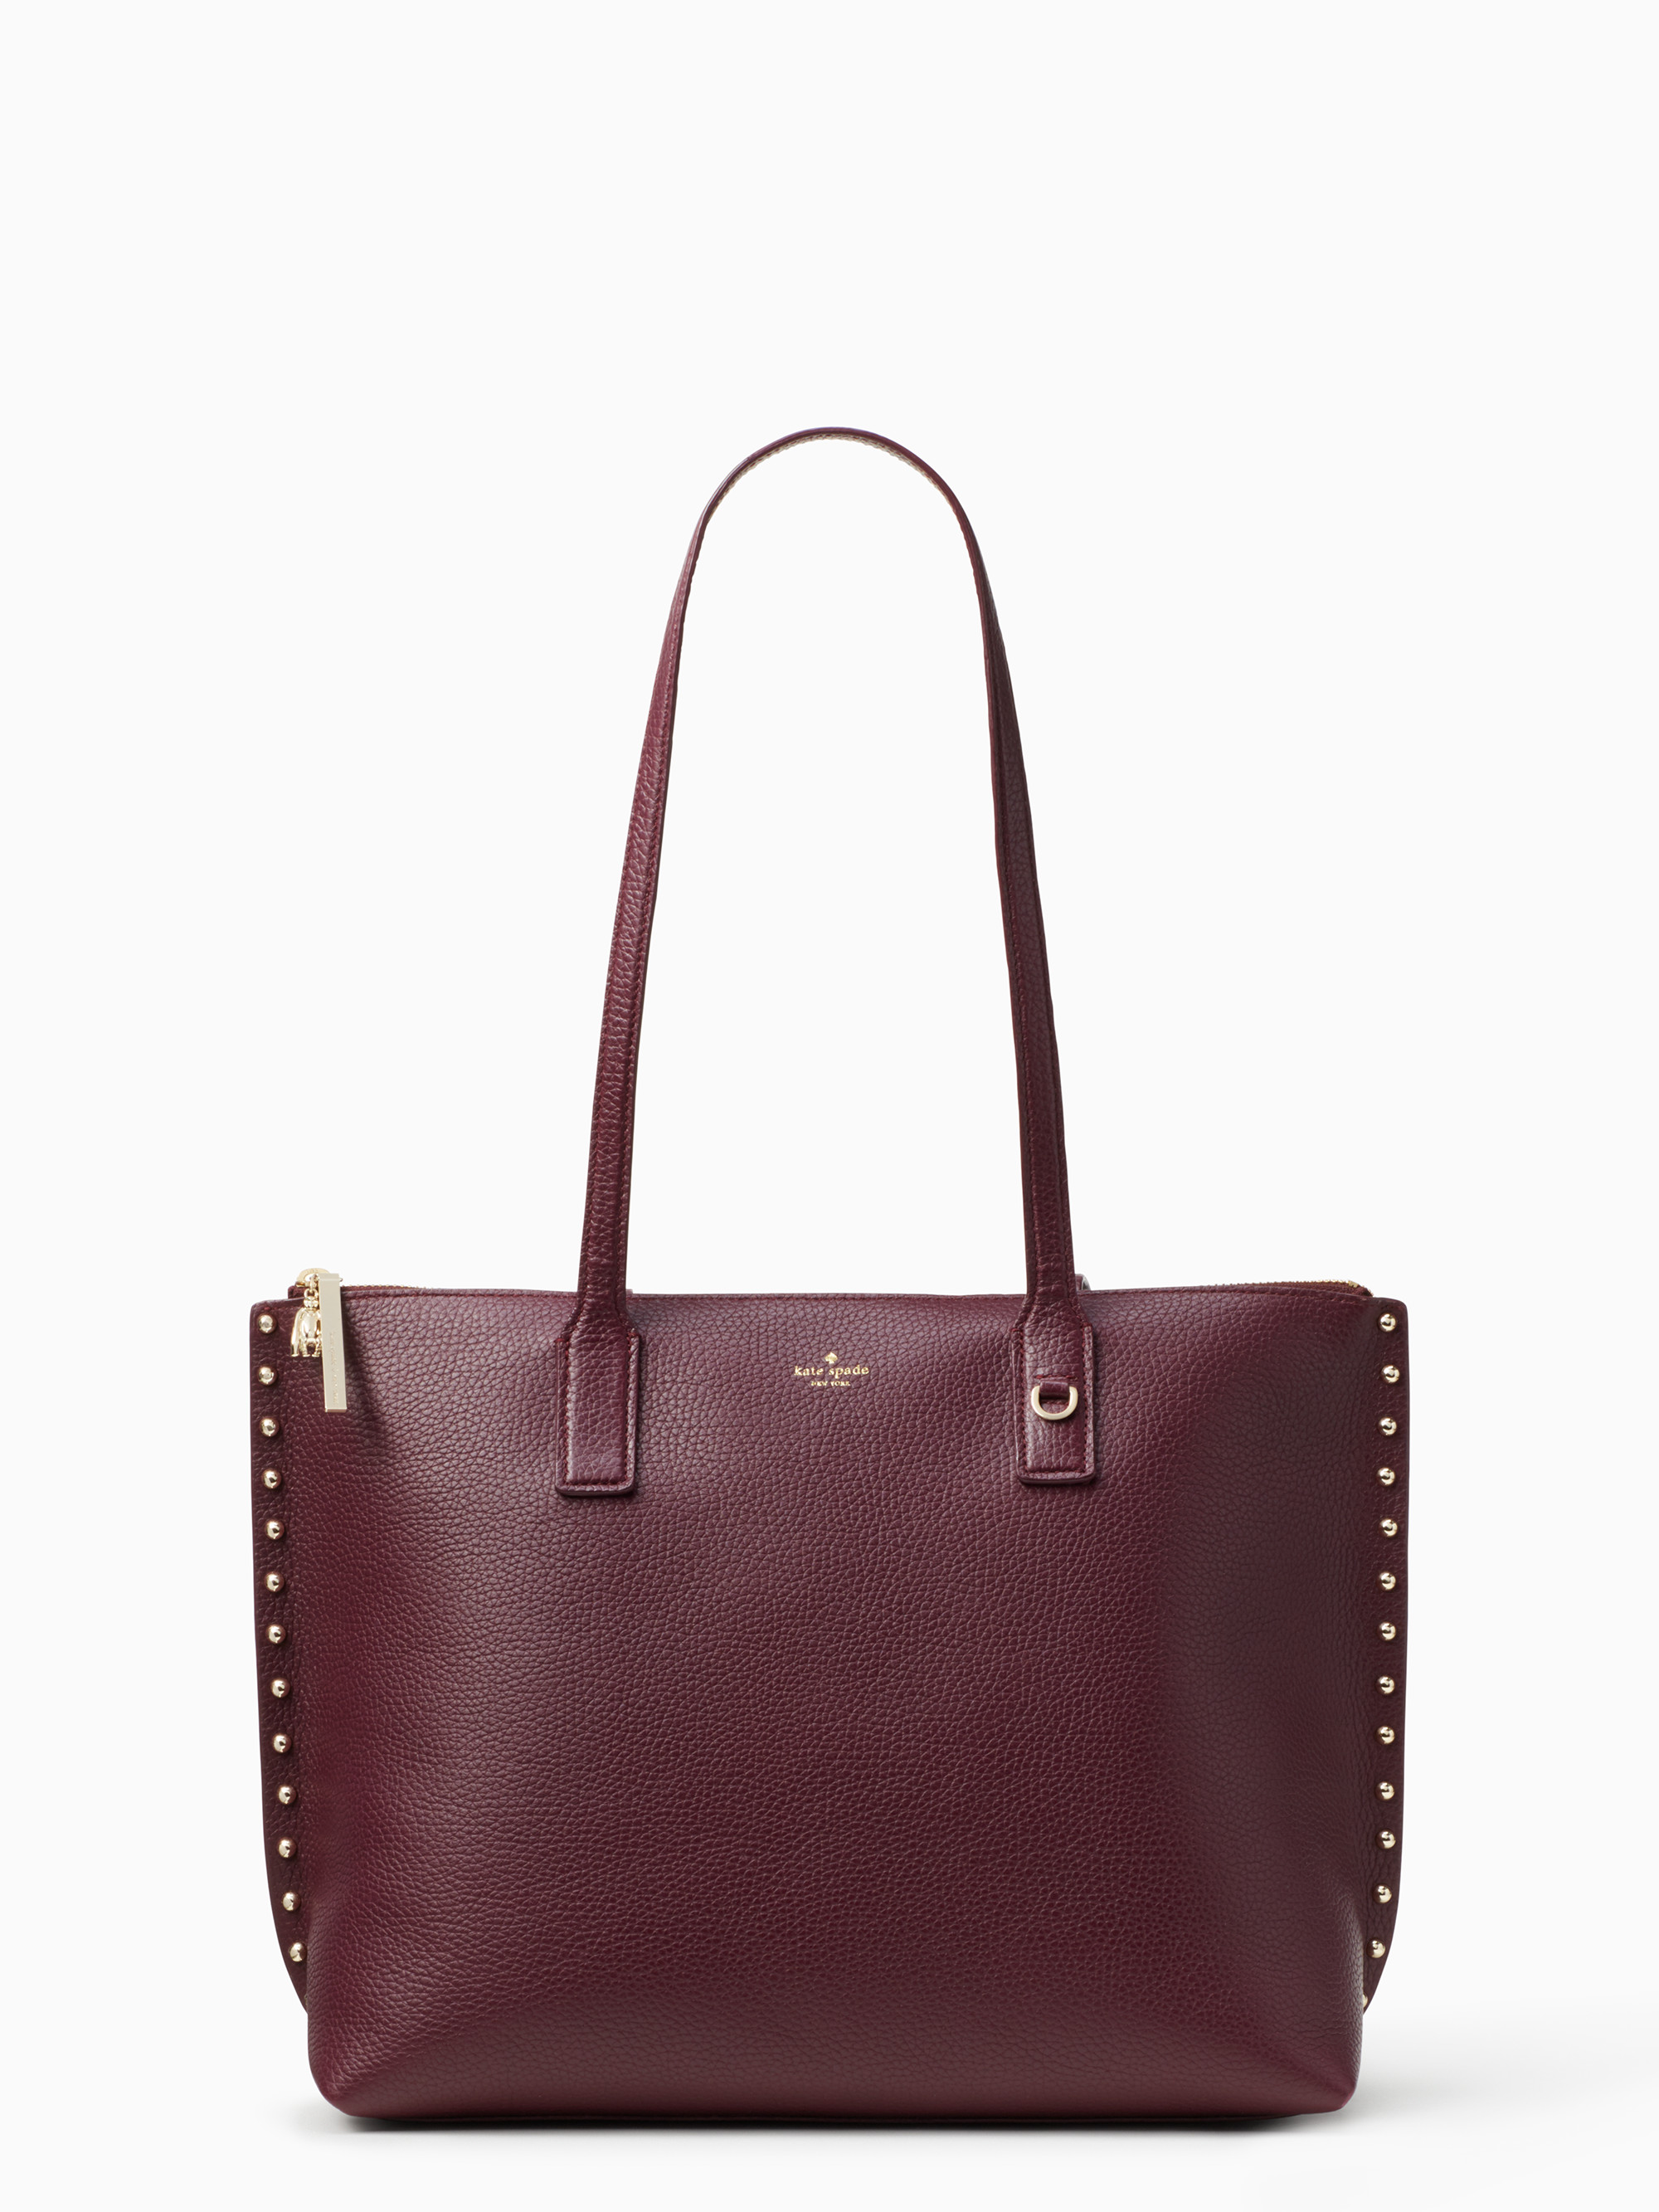 on purpose studded leather tote